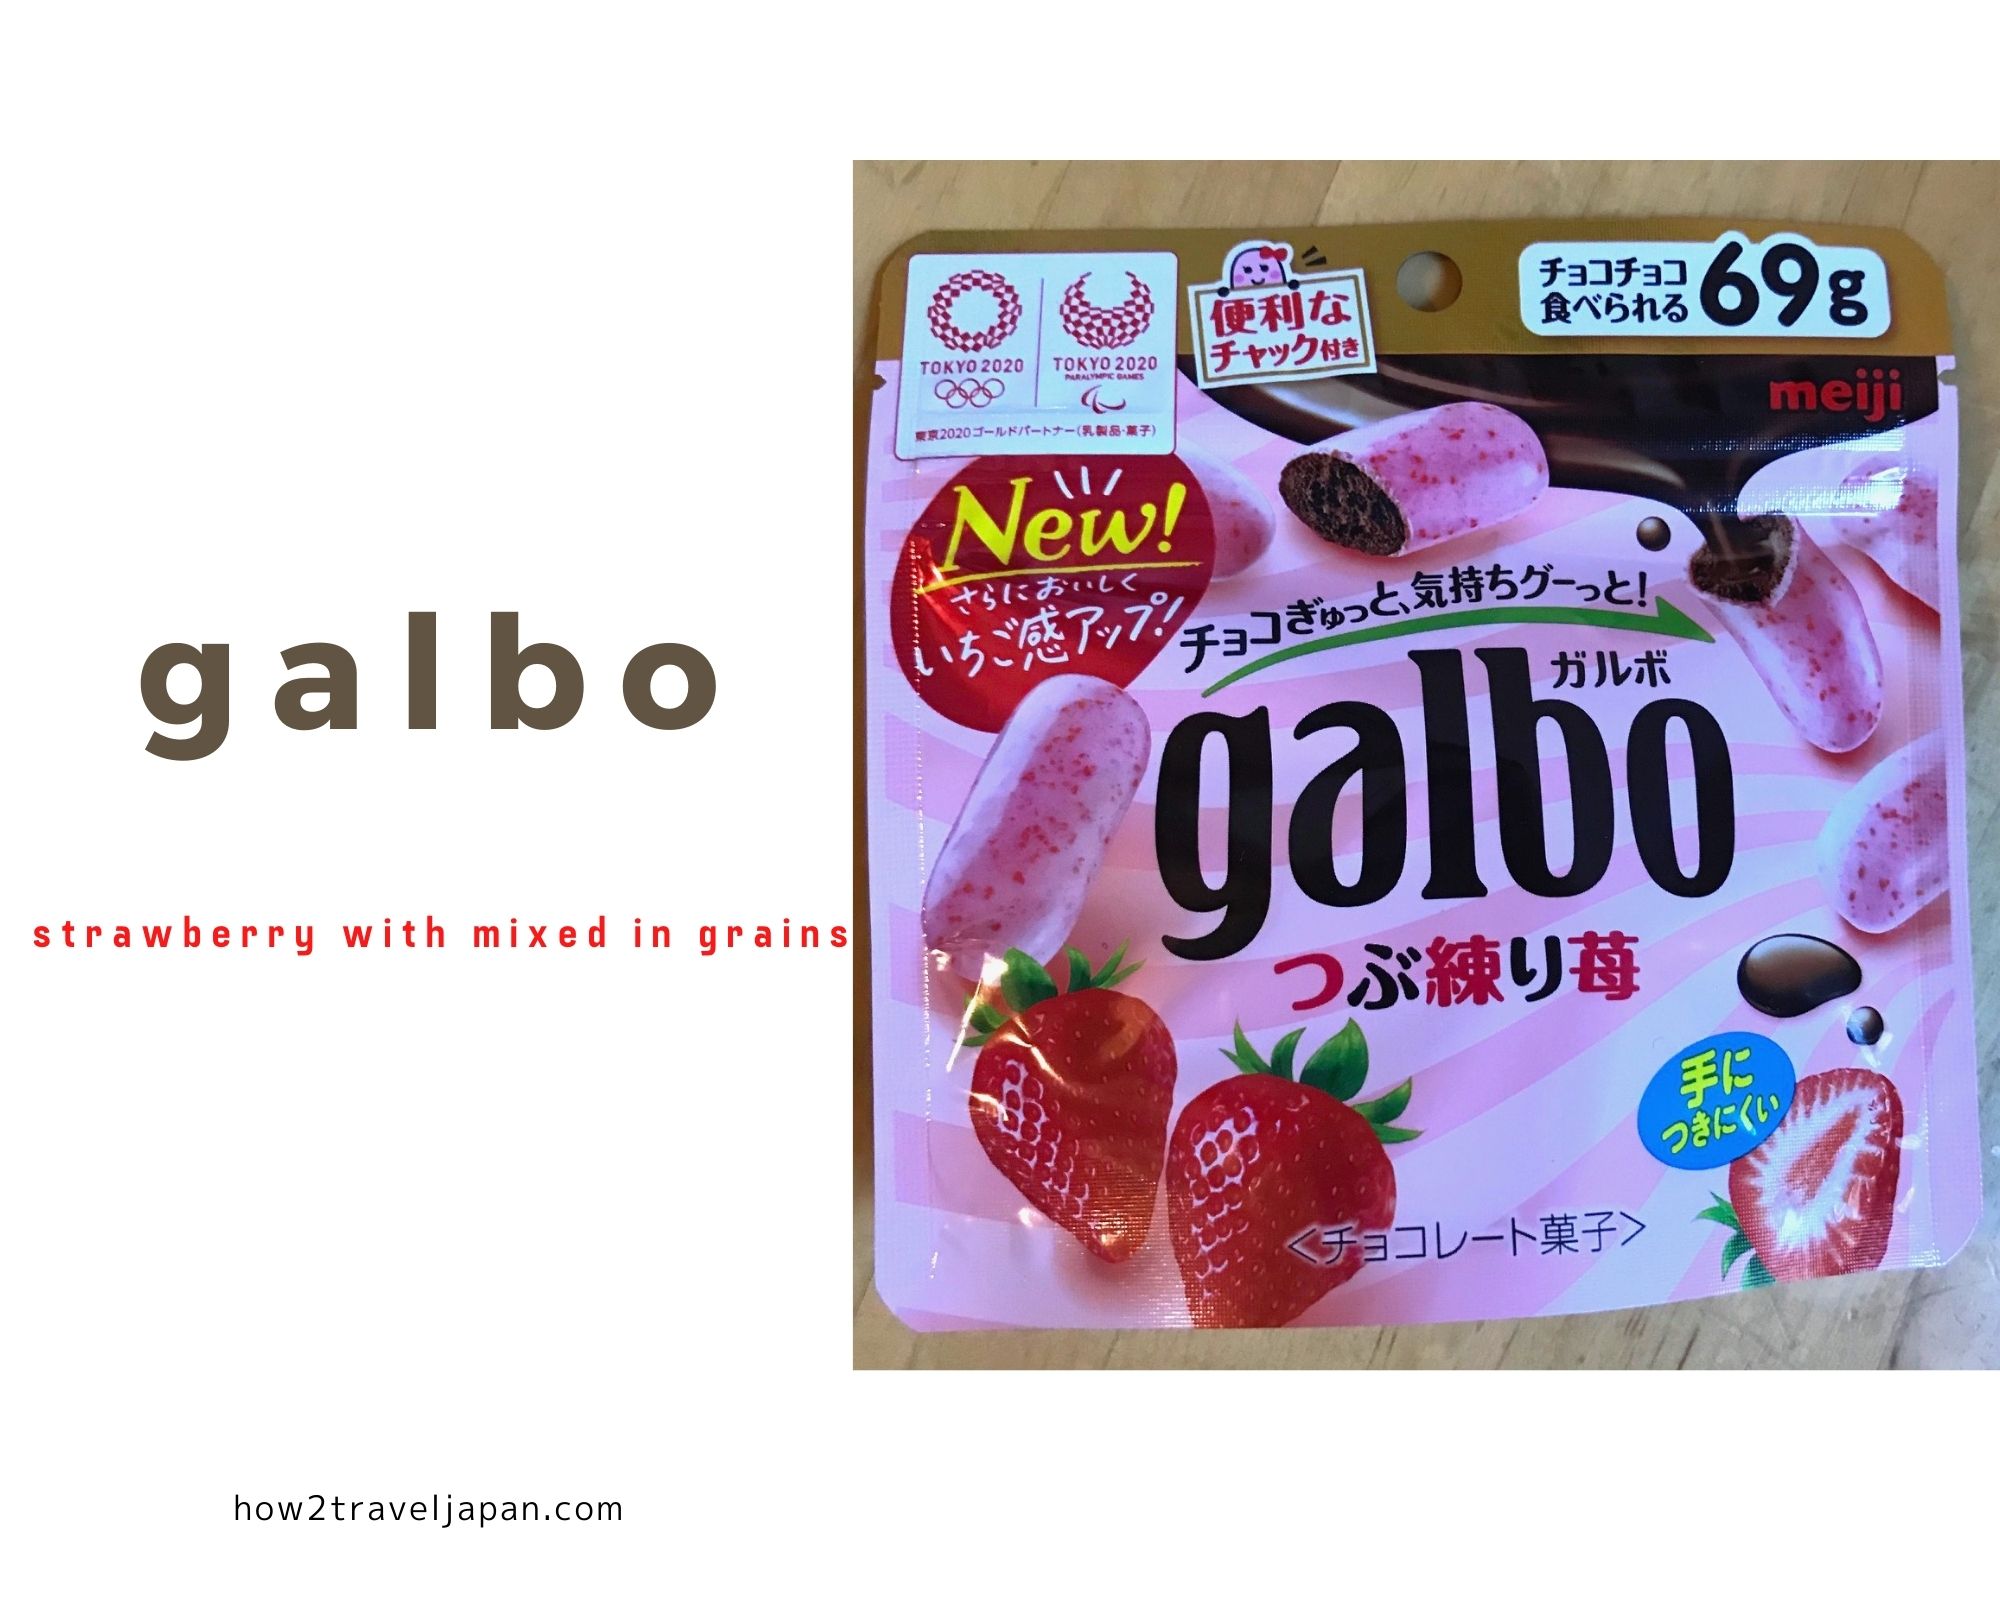 You are currently viewing Galbo, chocolate with mixed in strawberry grain from Meiji